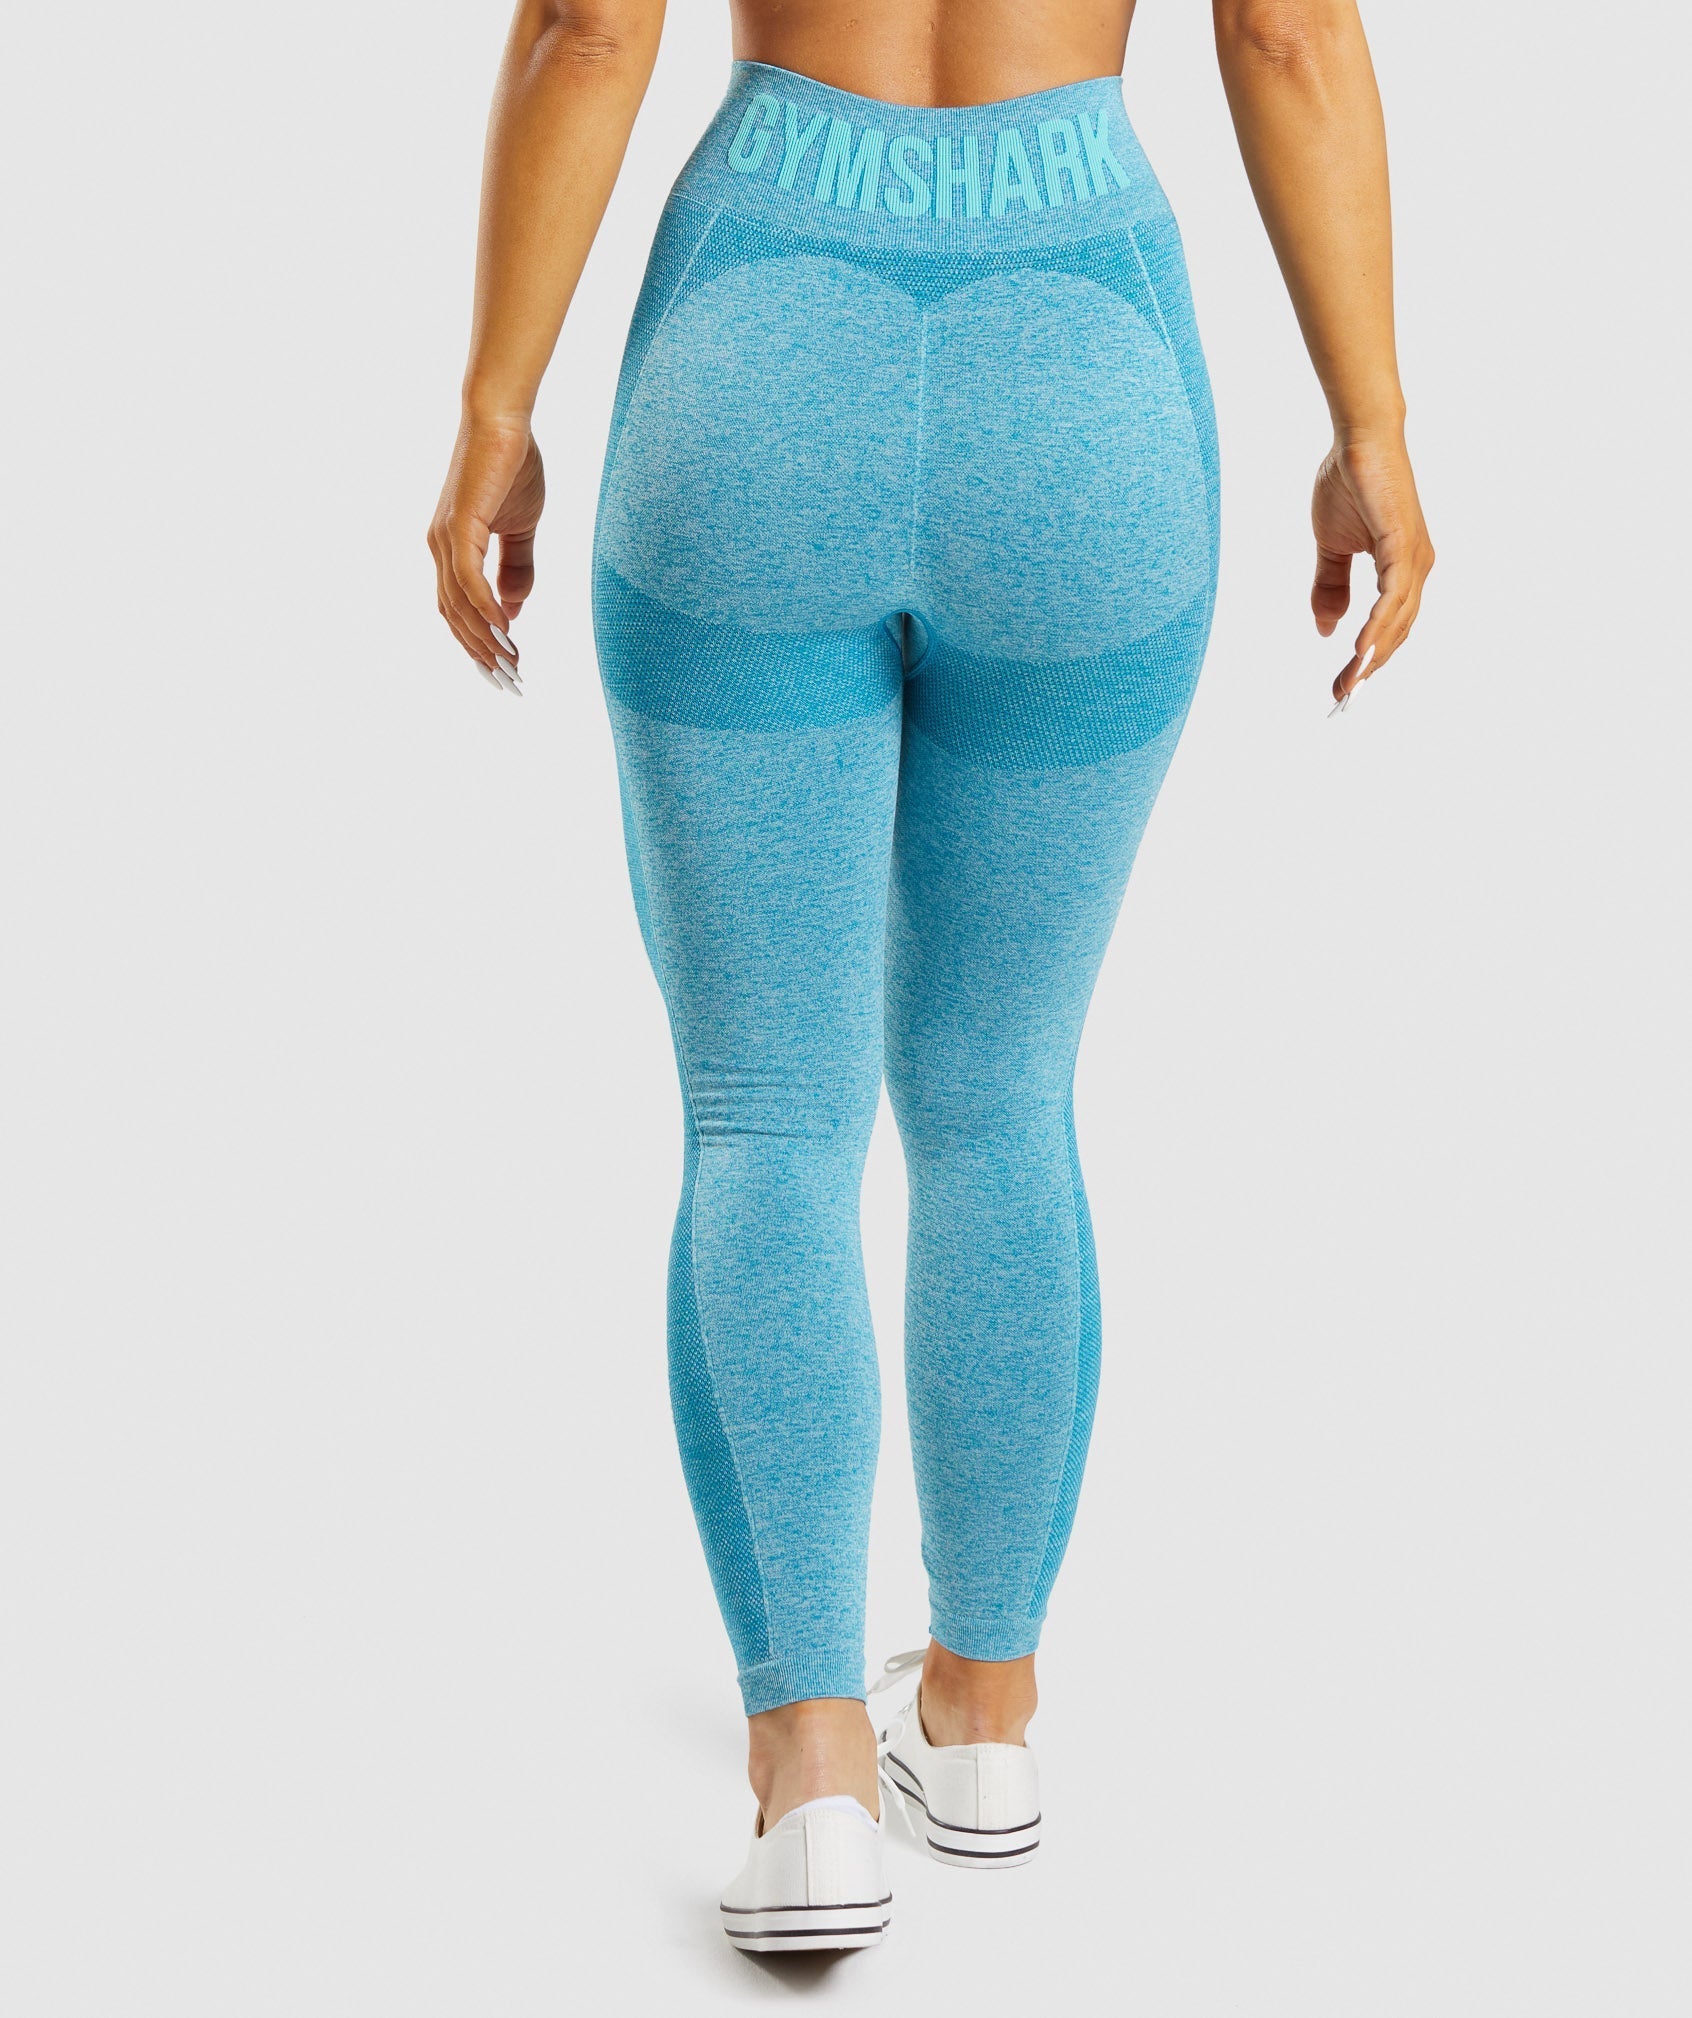 Gymshark Flex leggings - Complete size guid & Try on size Xs-L